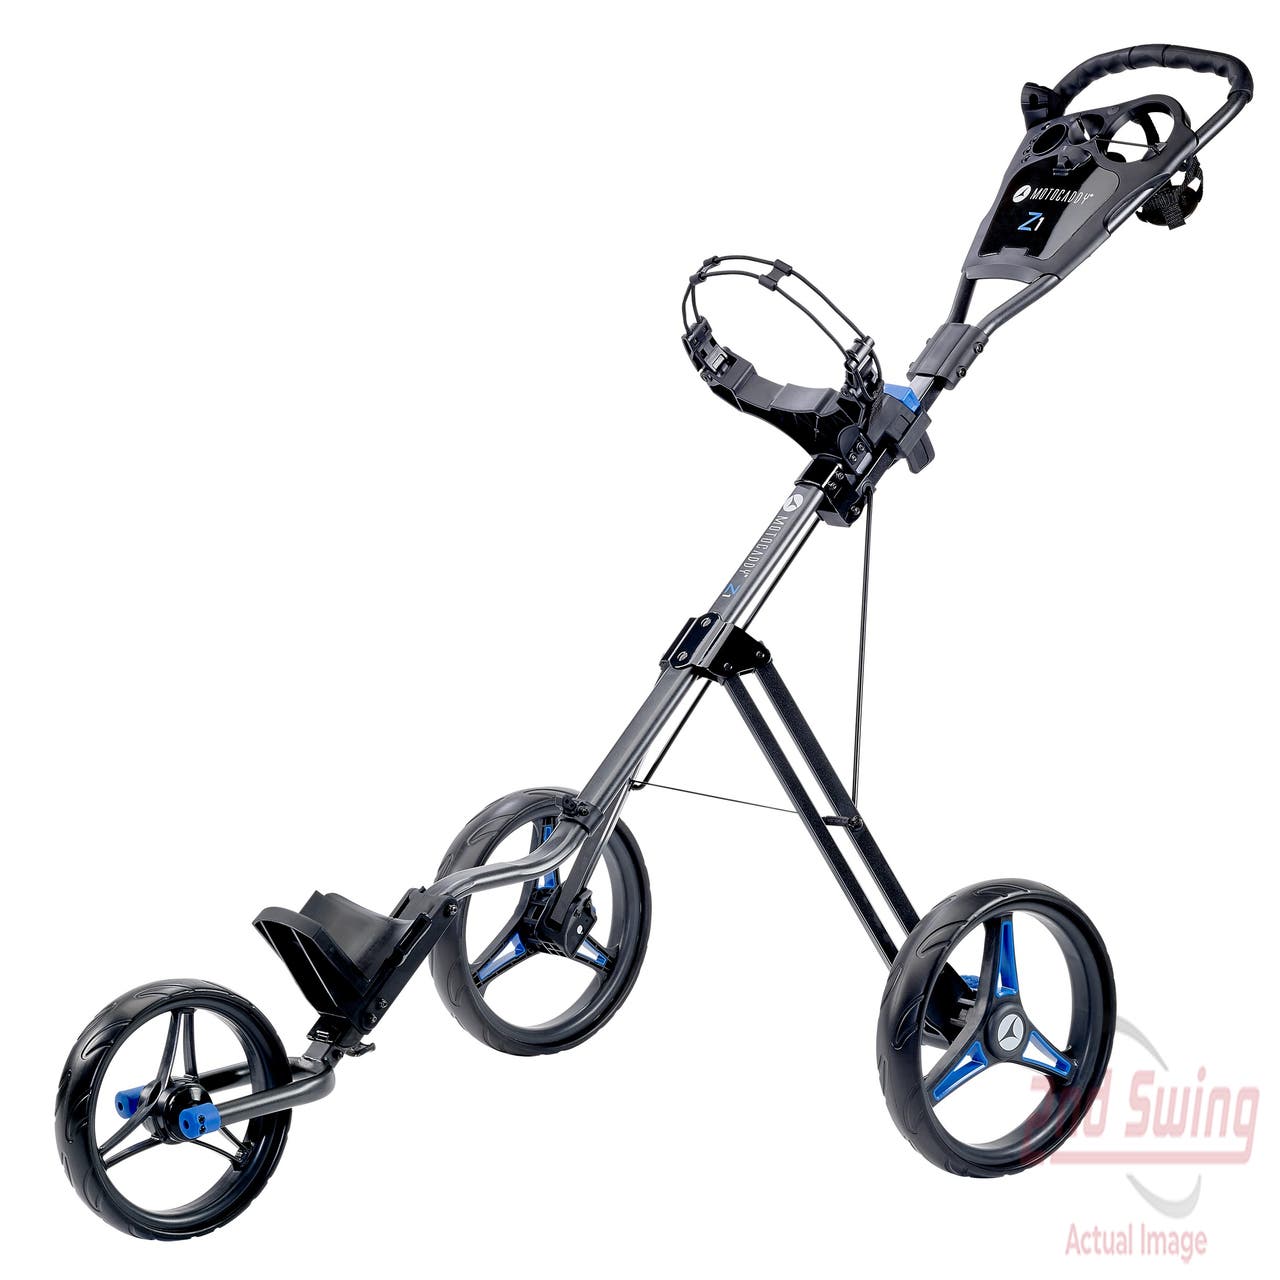 Motocaddy Z1 Push and Pull Cart